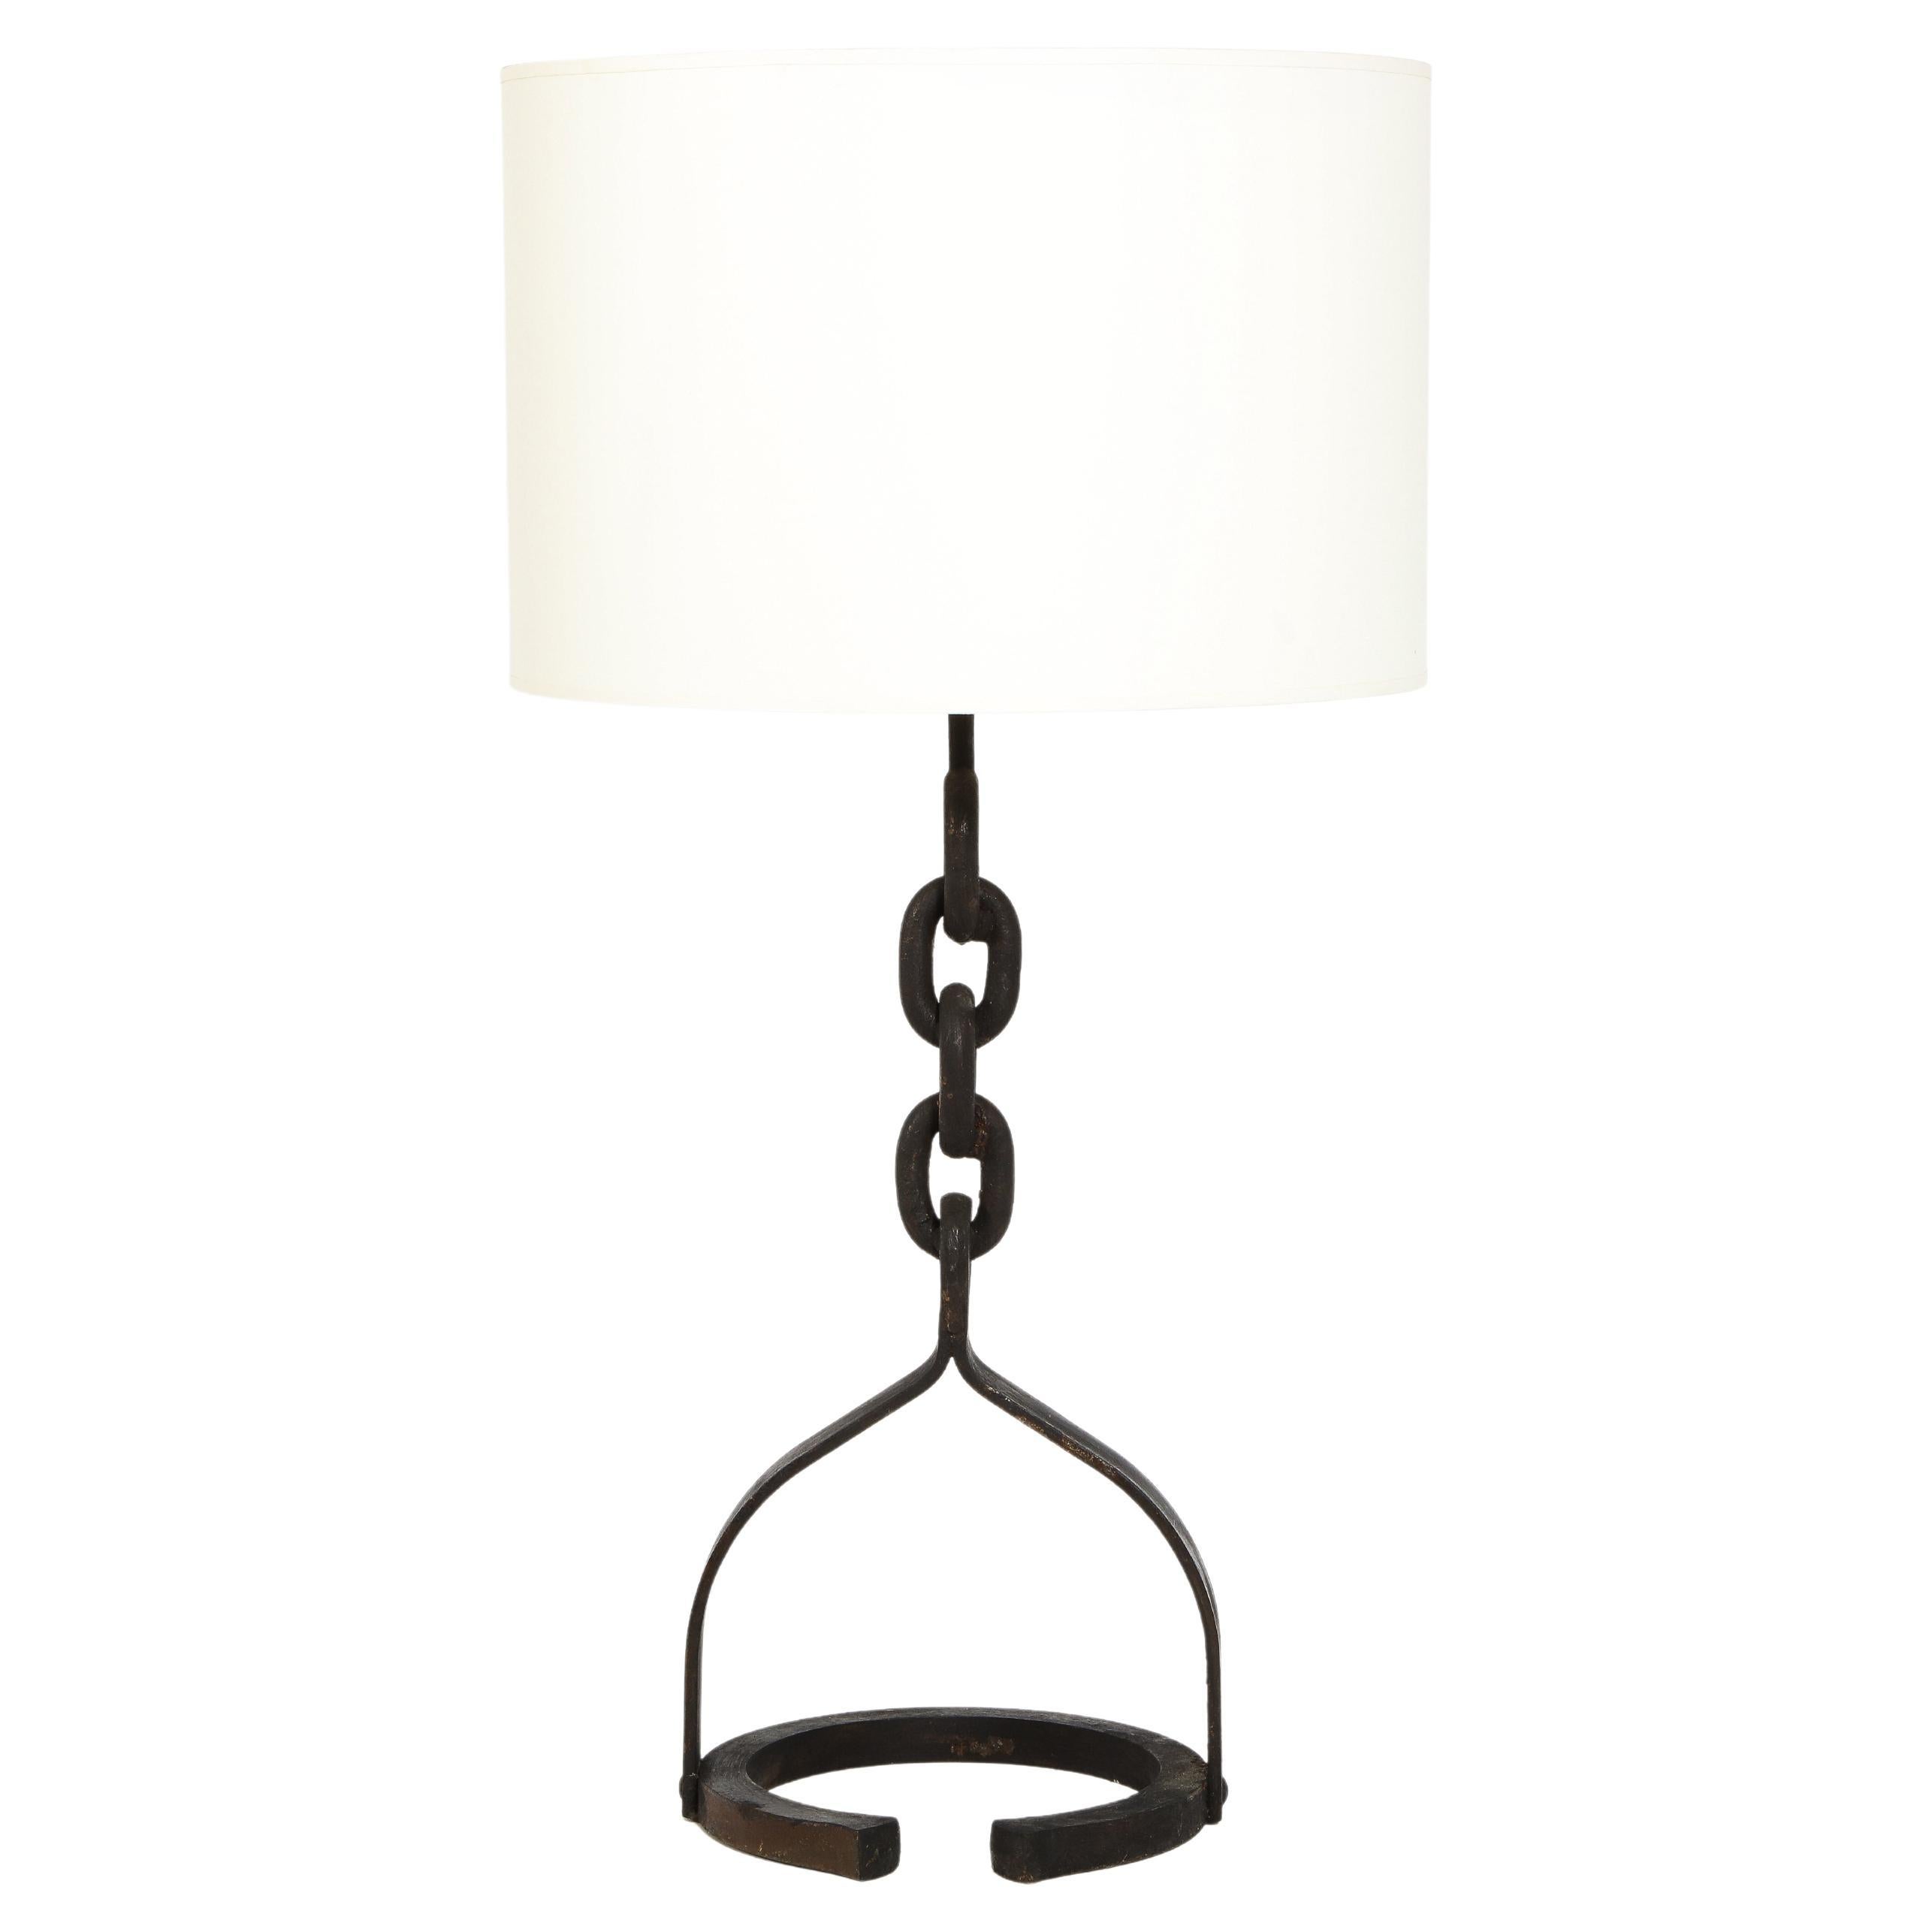 Classic Wrought Iron Chain Motif Table Lamp, France 1960's For Sale